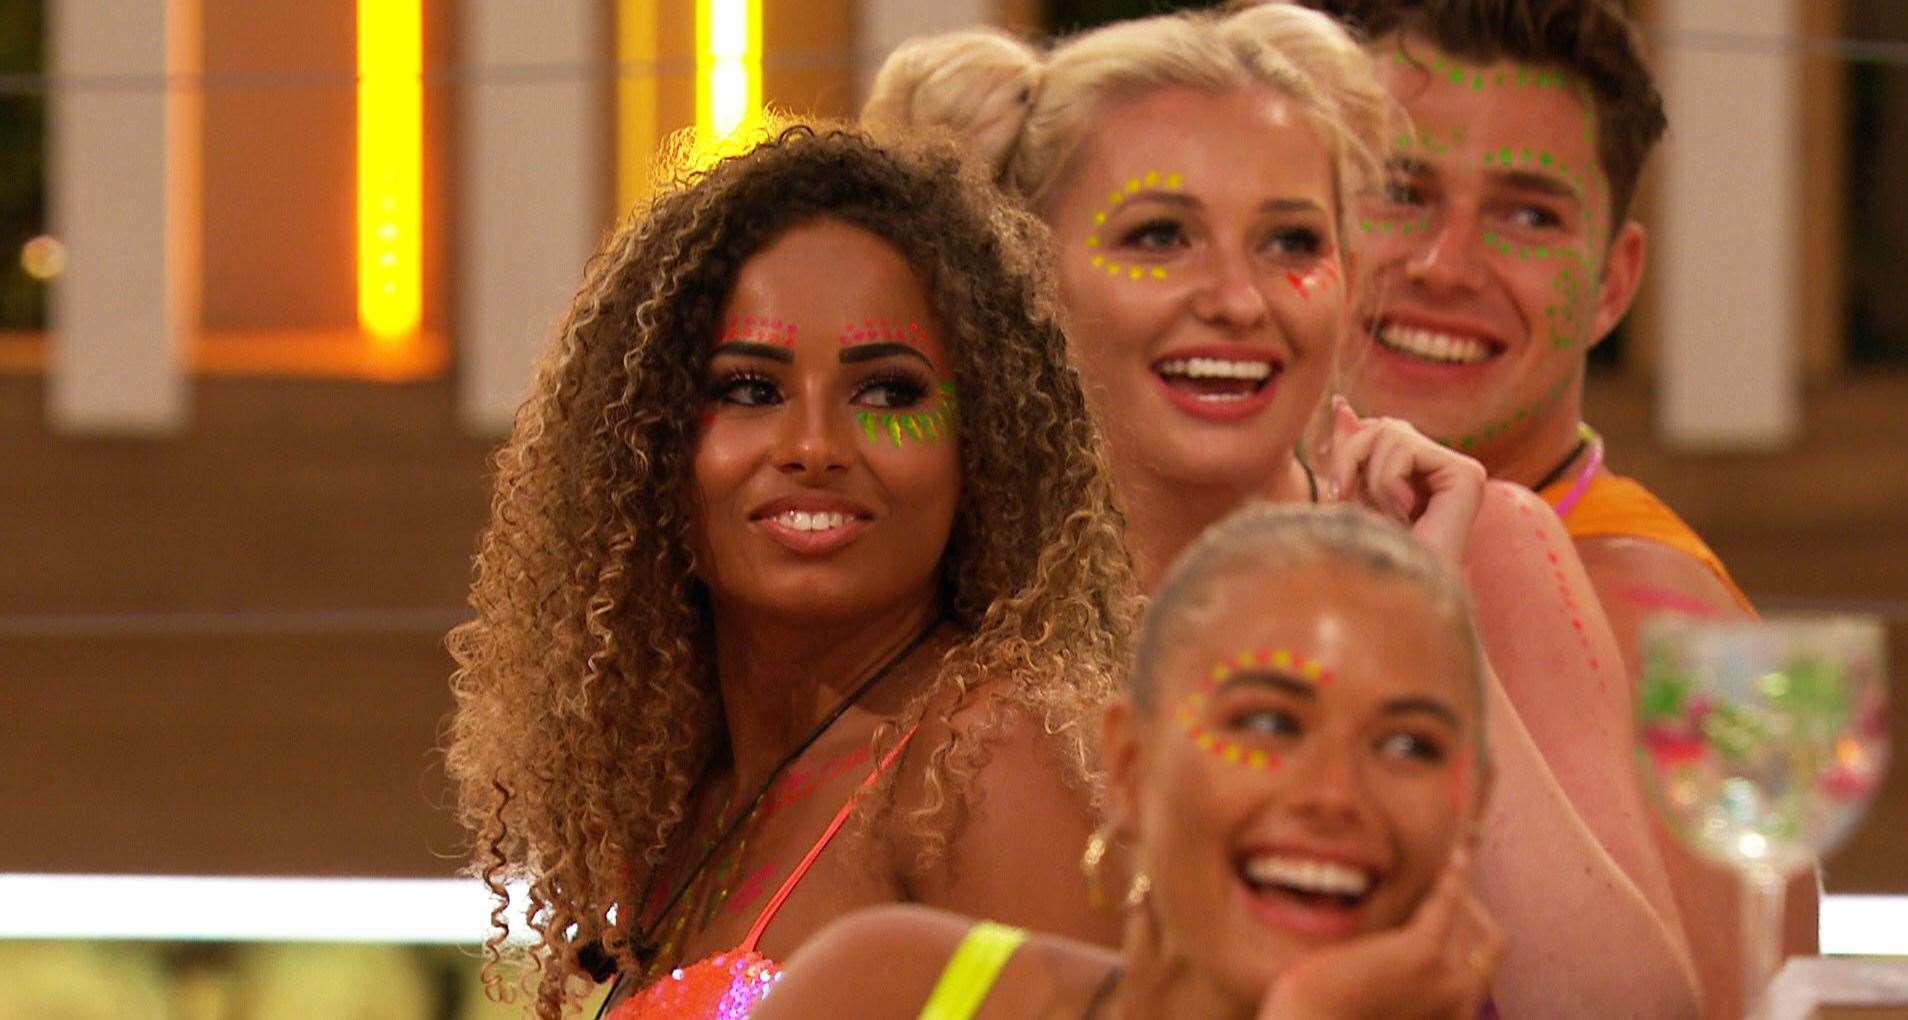 Love Island has had fans hooked Picture: ITV Plc